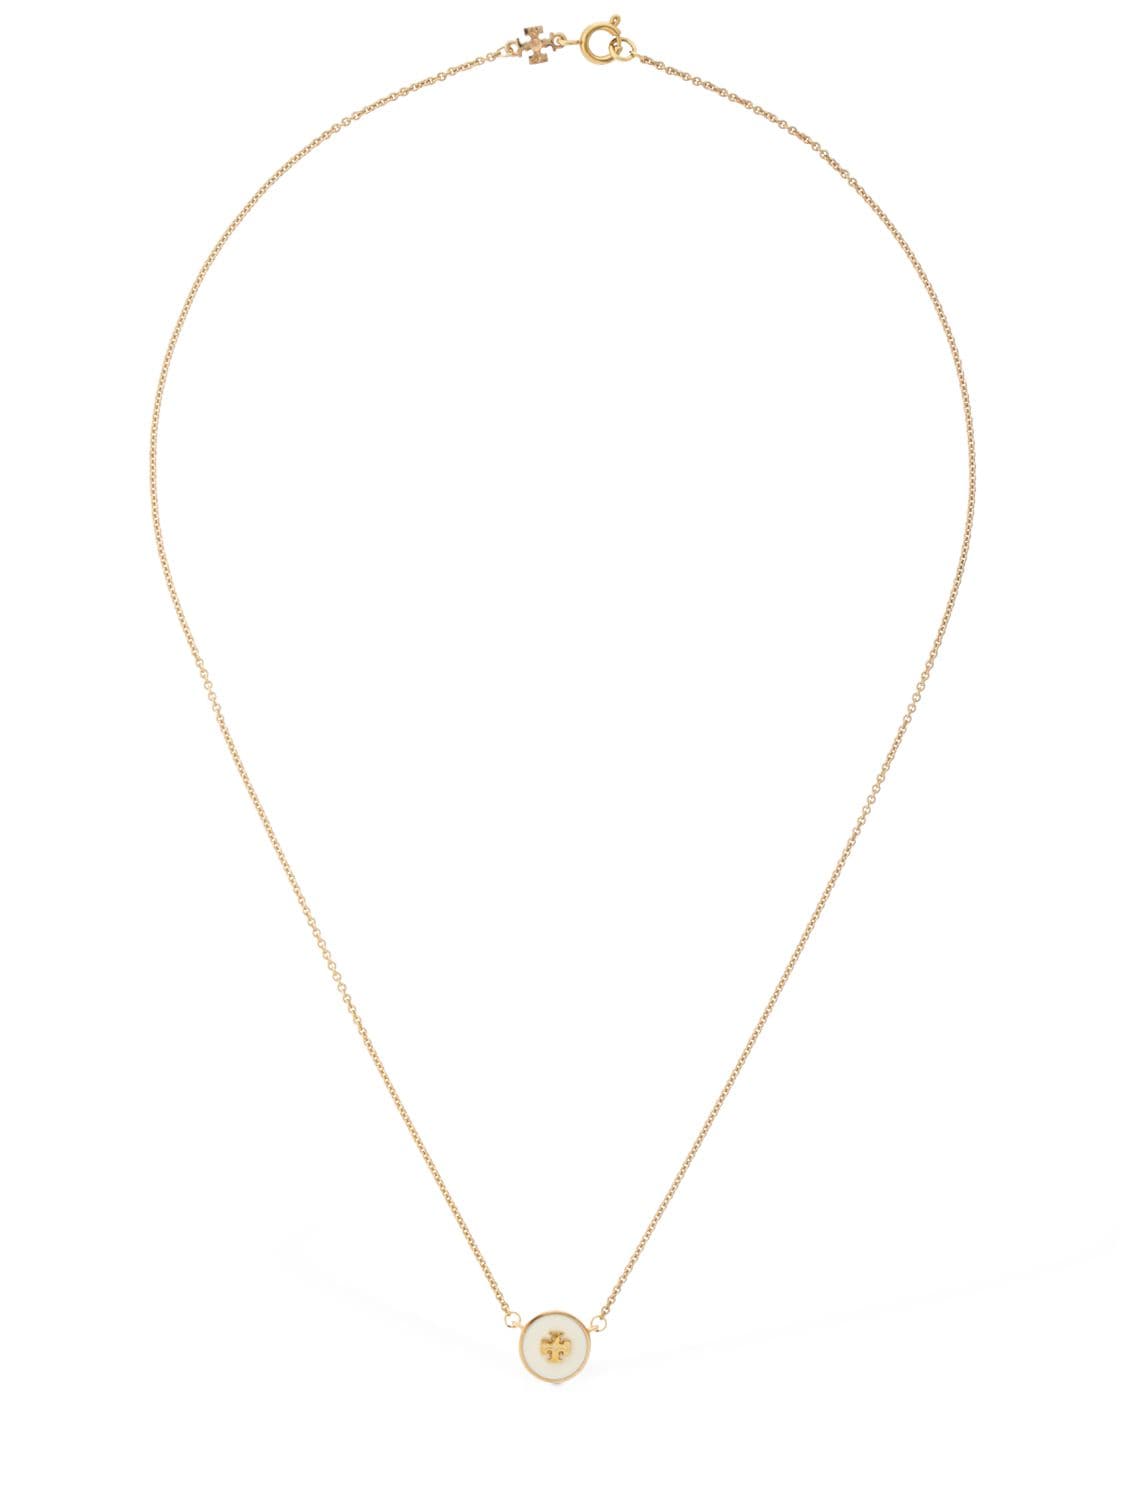 Tory Burch Kira Enamel Short Chain Necklace In Gold,ivory